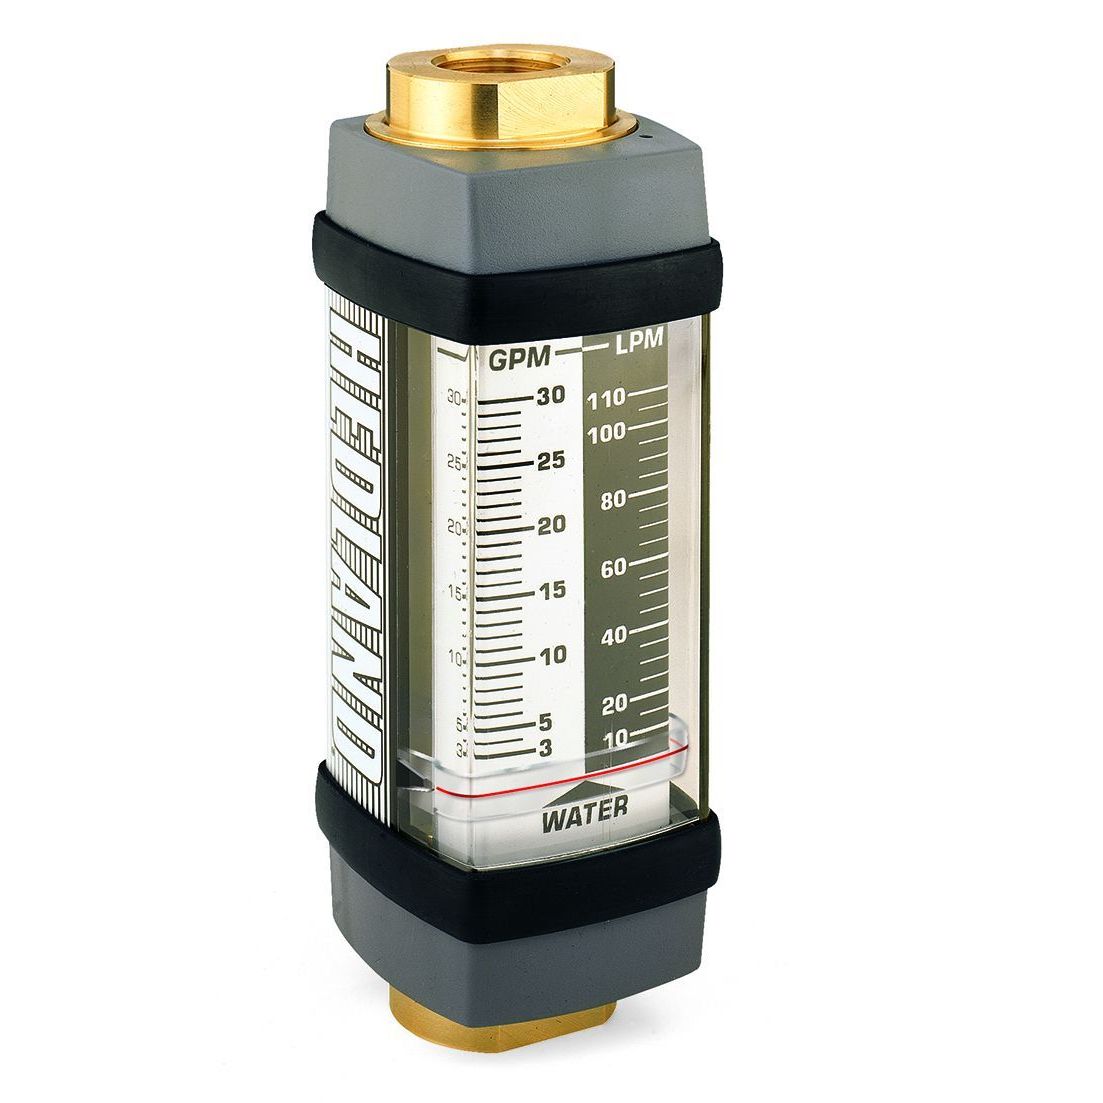 H855B-075 : Hedland 3500psi Brass Flow Meter for Water, 1.25 NPT, 10 to 75 GPM